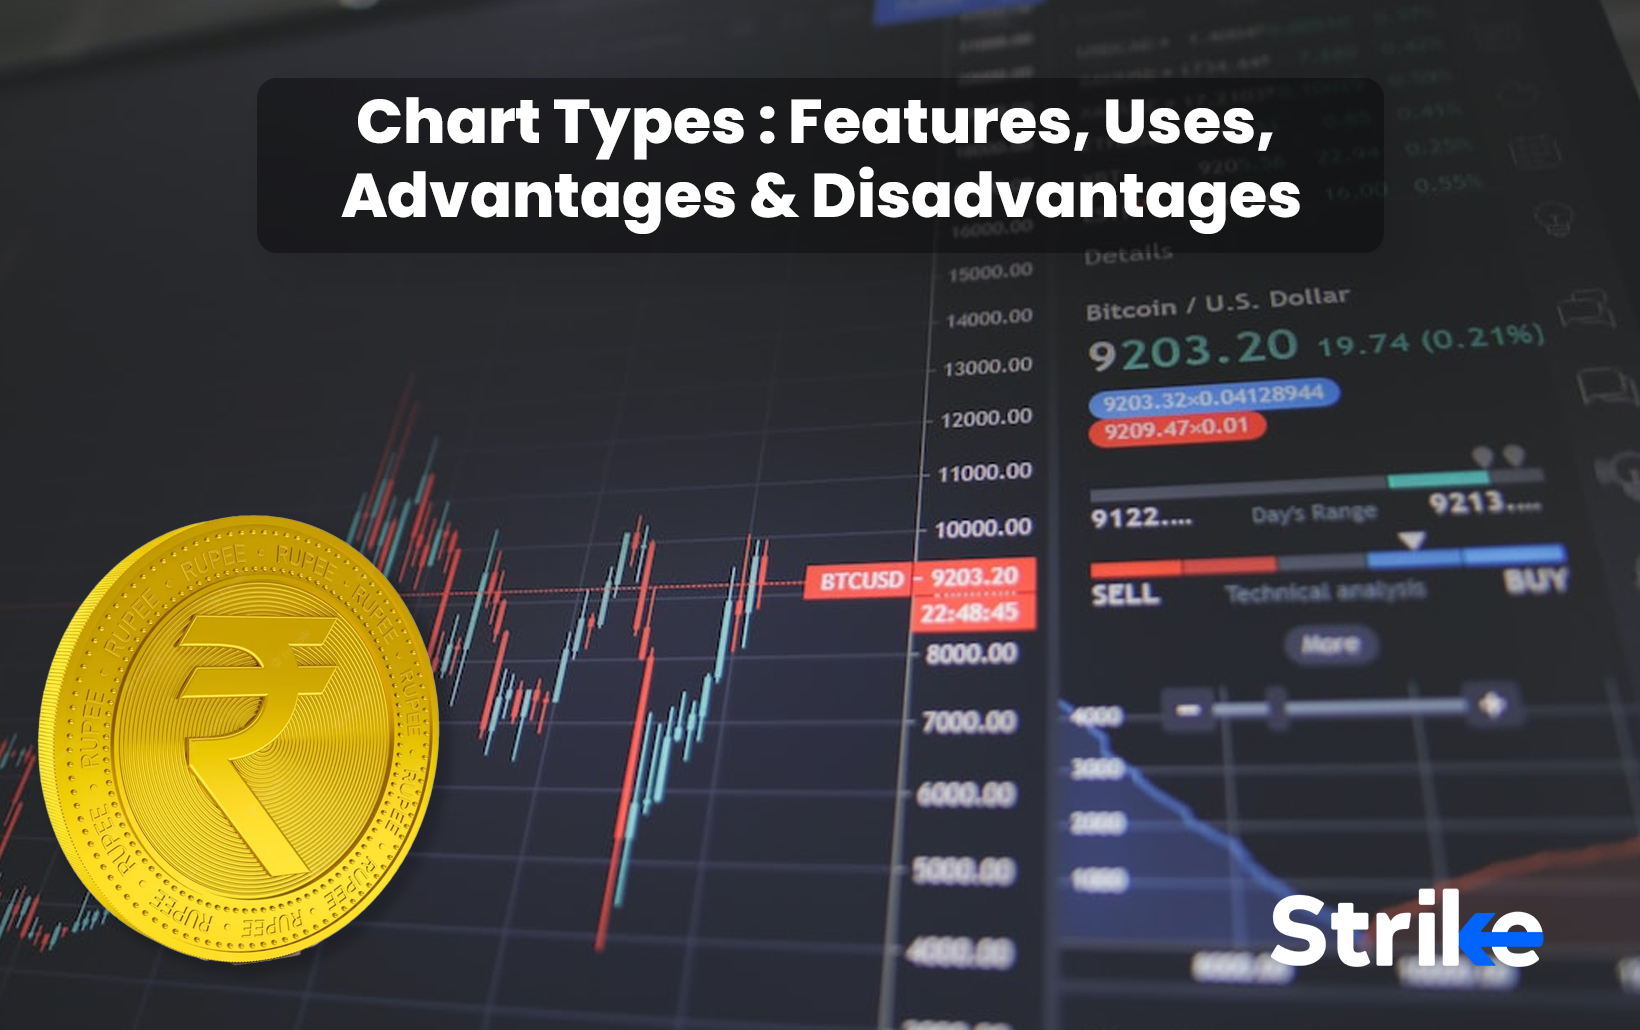 Chart Types: Features, Uses, Advantages and Disadvantages